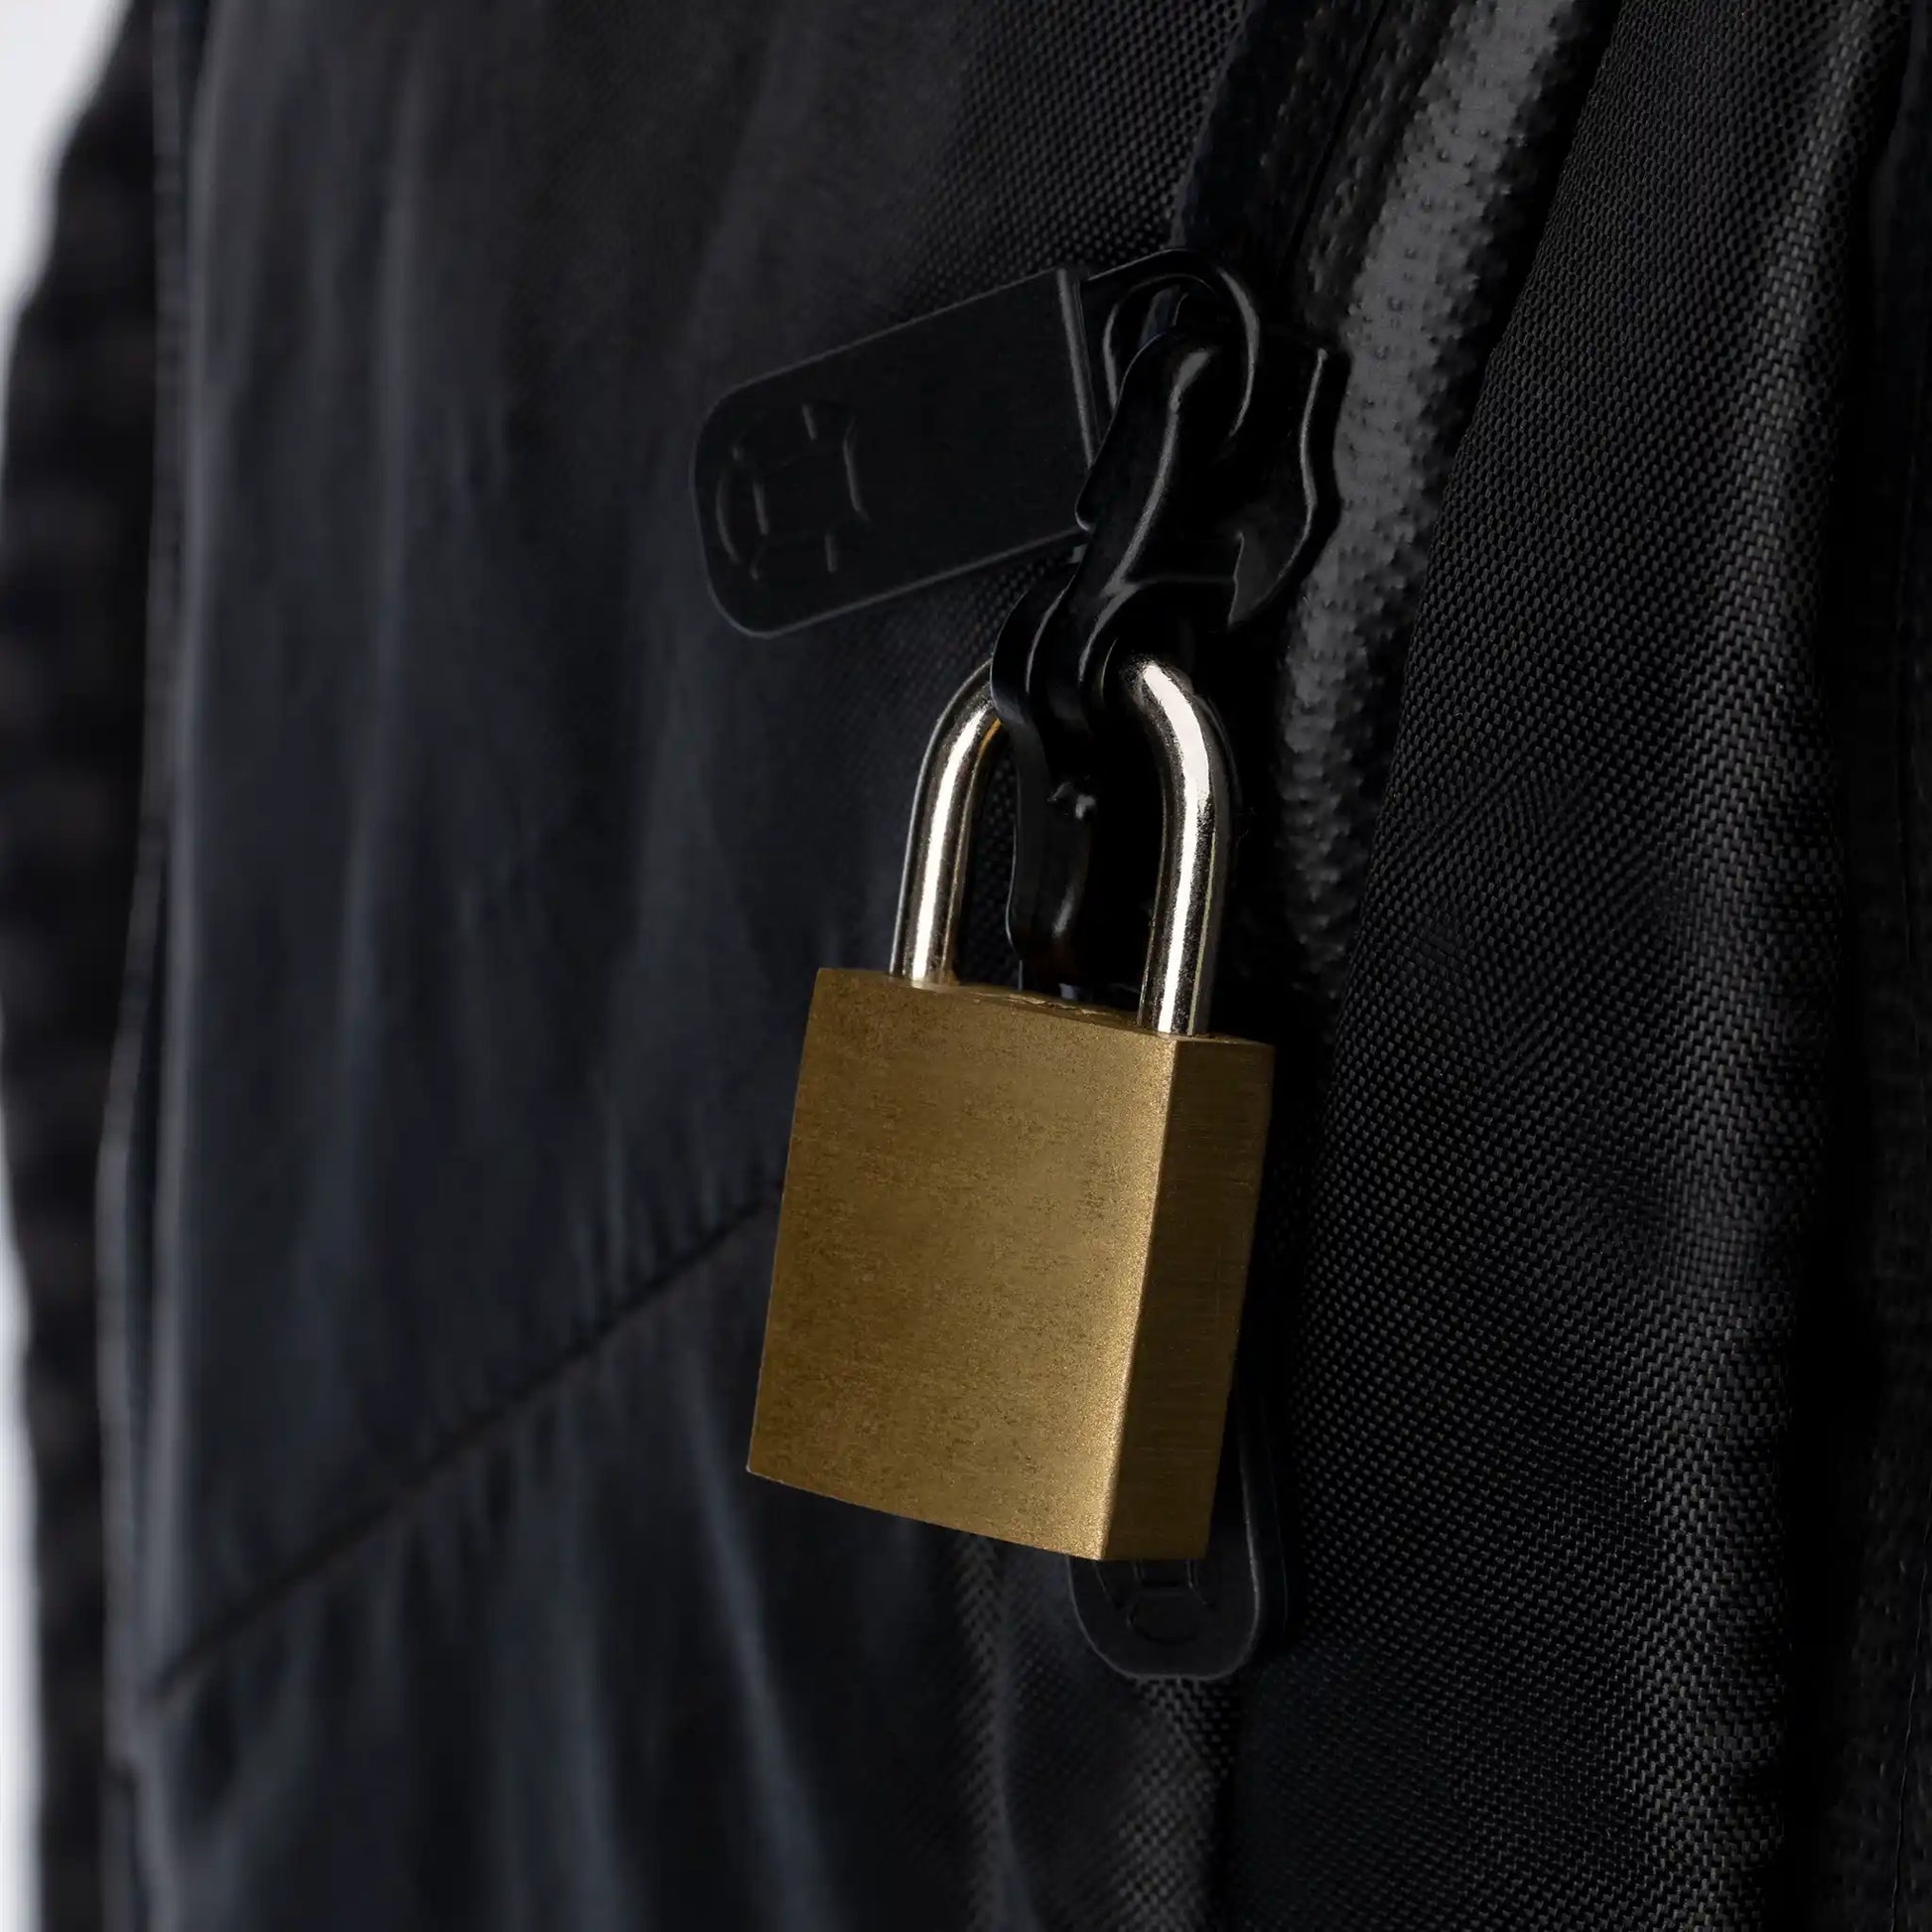 Lockable zippers keep your stuff safe (lock not included)